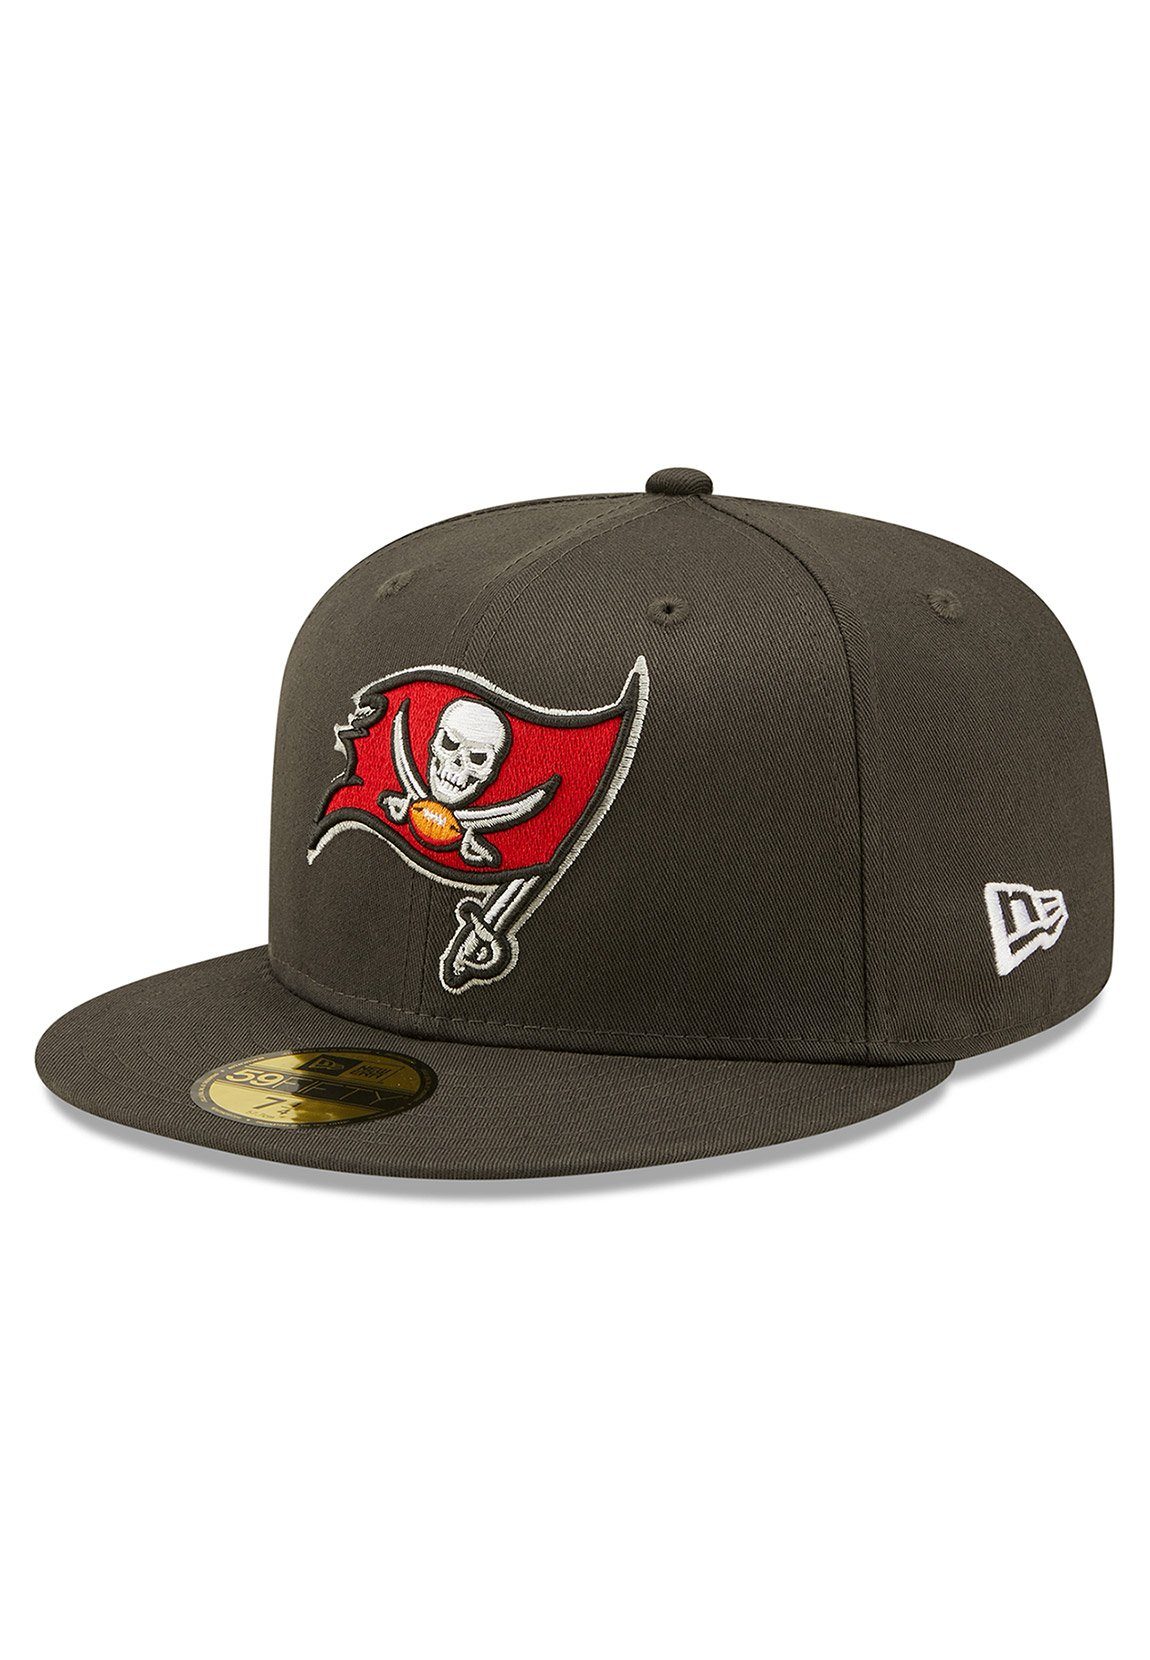 BUCCANEERS Era TAMPA BAY Charcoal New Cap Fitted Patch 59Fifty New Side Grau